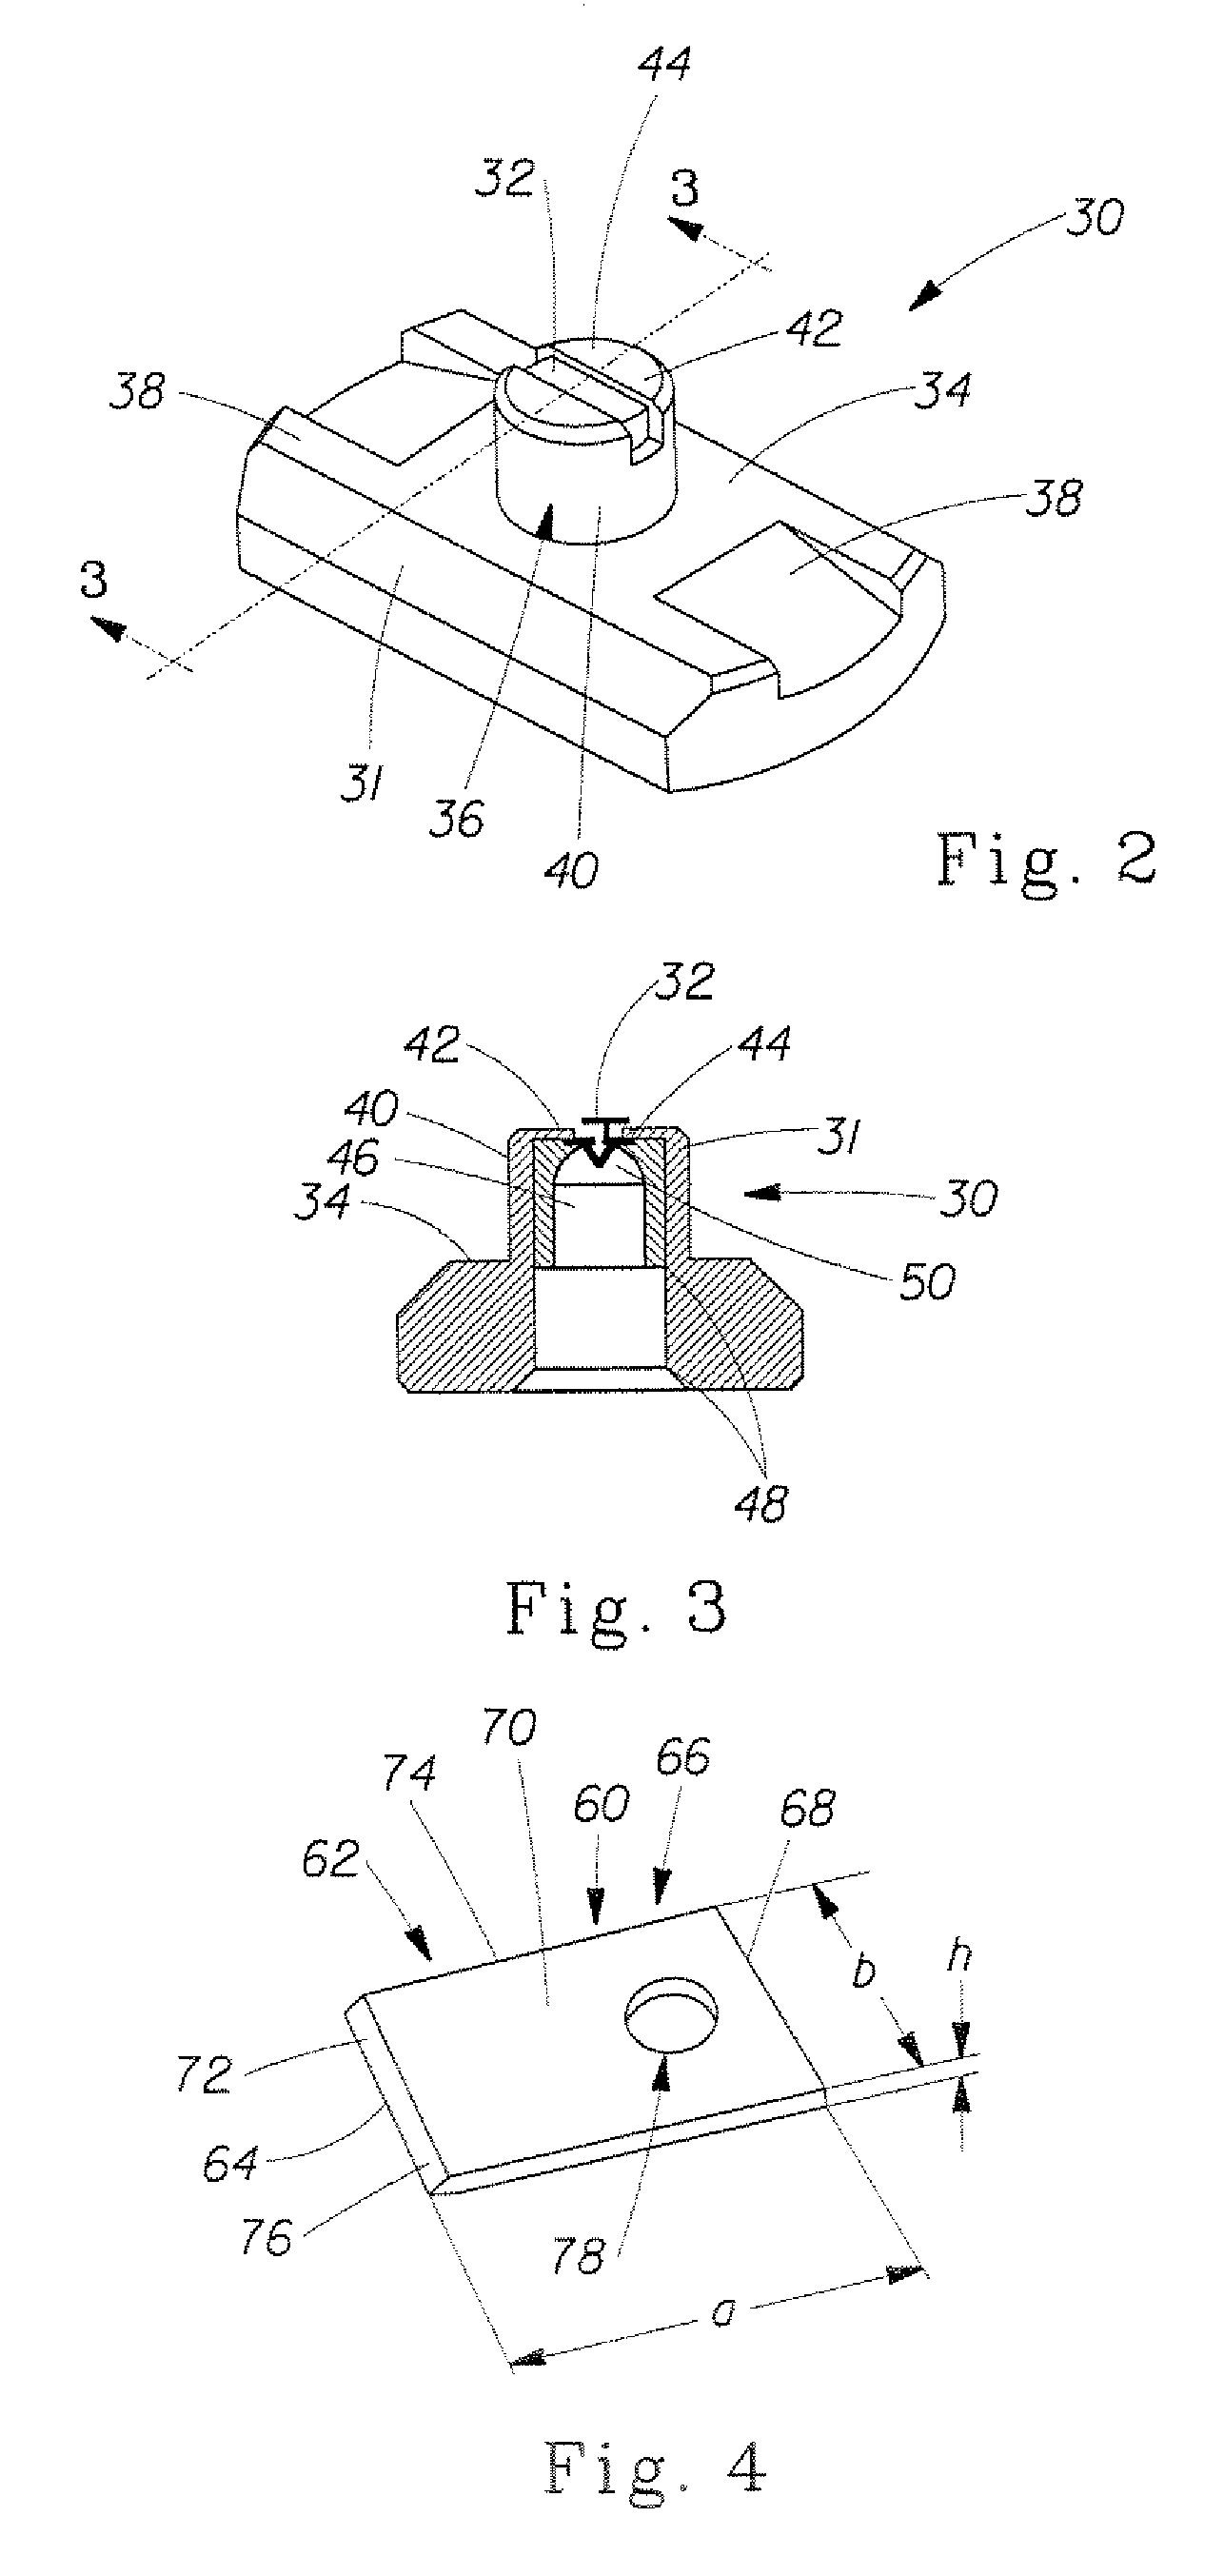 Apparatus and method for mixing by producing shear and/or cavitation, and components for apparatus